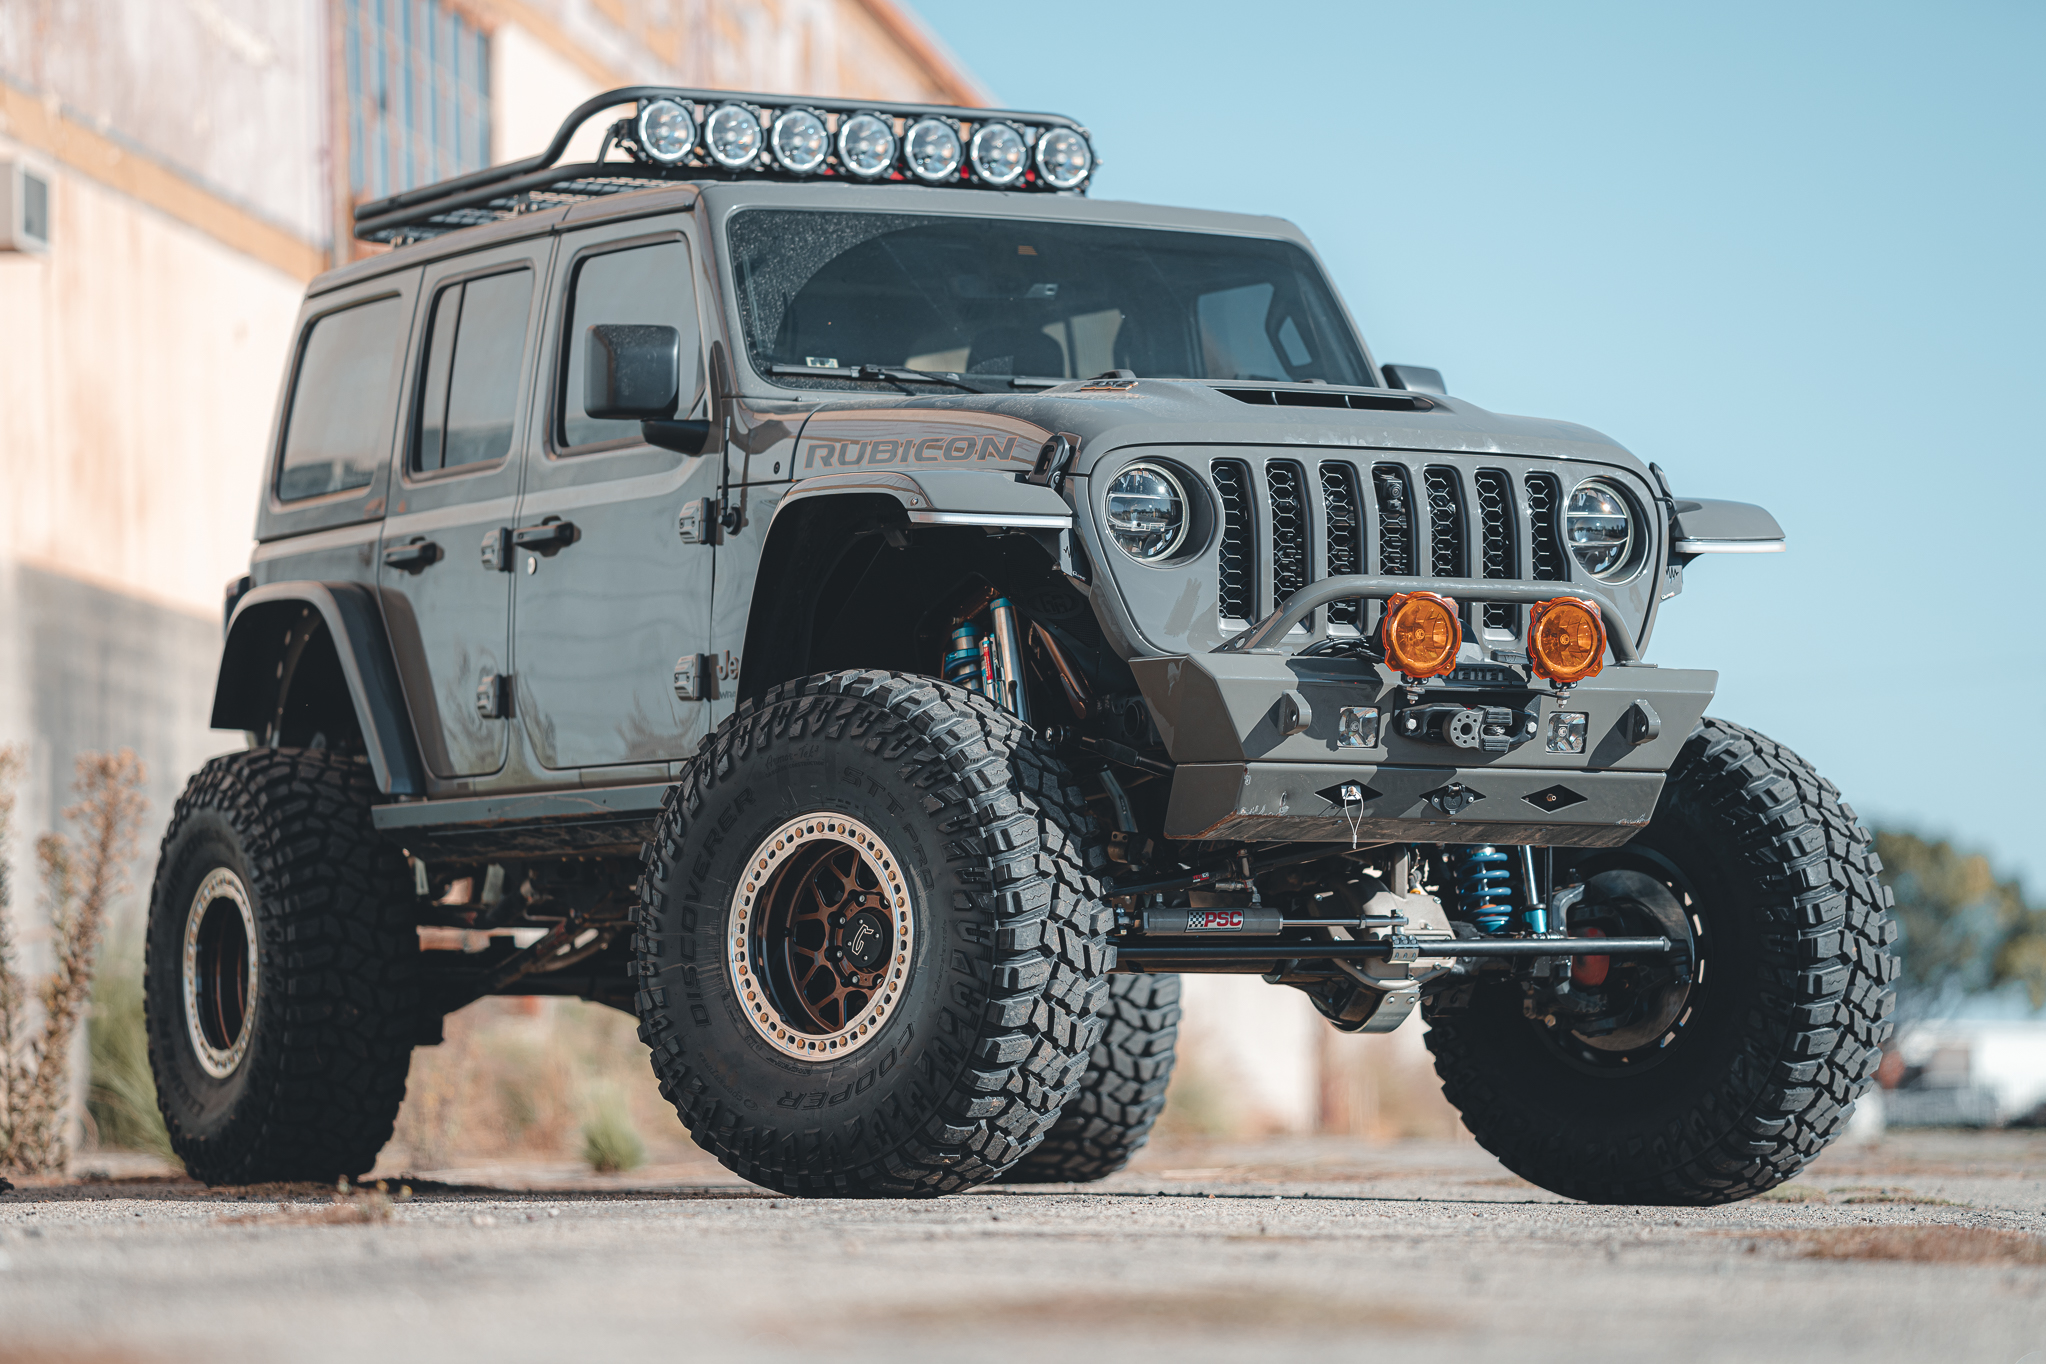 392 Rubicon Jeep Wrangler Recon DSS Built By Rebel Off Road - REBEL OFF ROAD